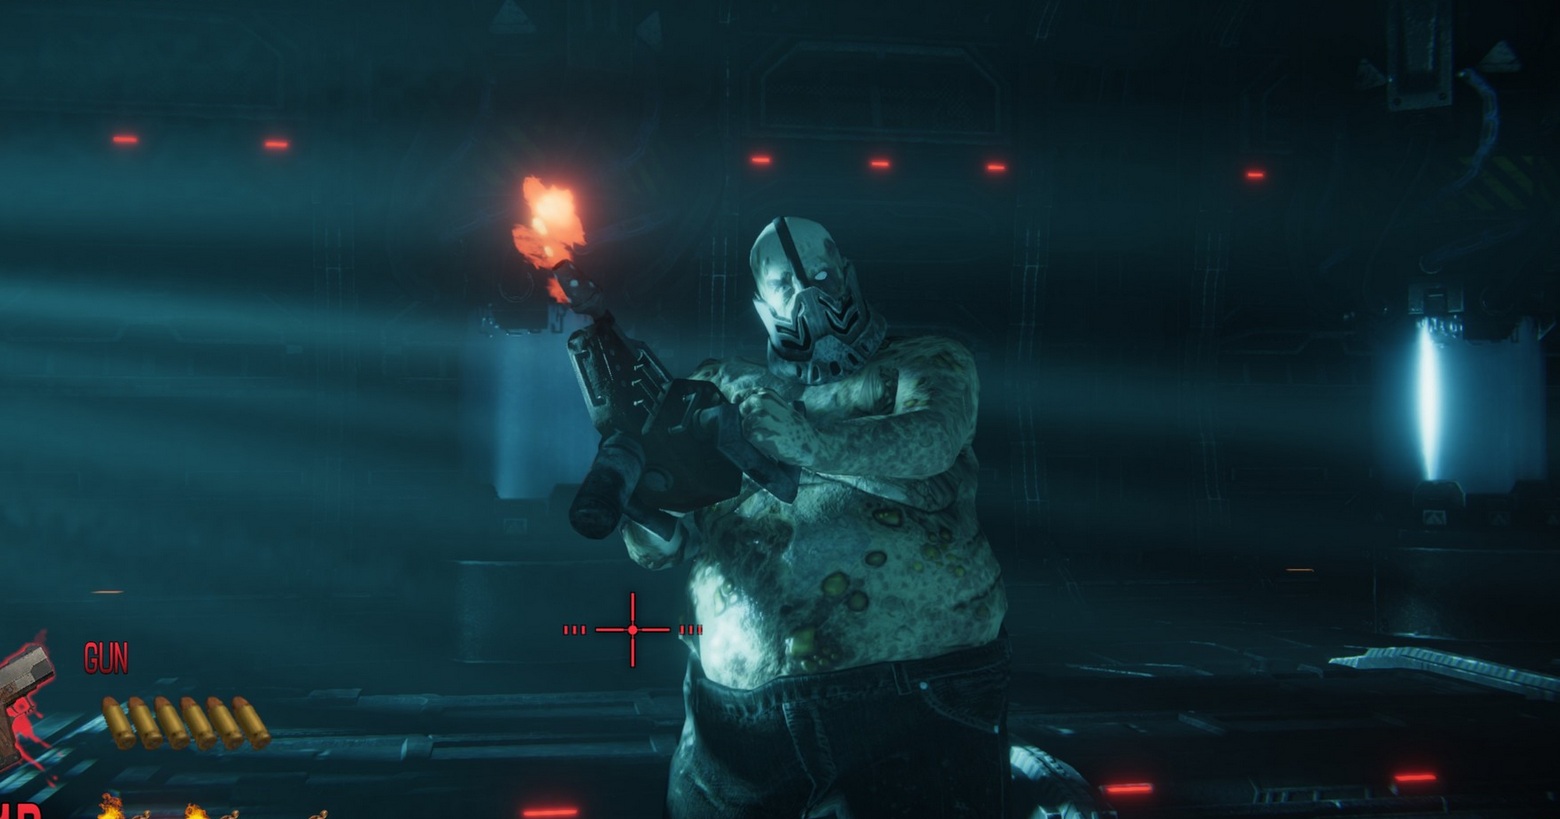 In this screenshot from House of the Dead Remake, we, as the player in the first-person perspective, catch sight of a fat pale boss with an exposed-infested torso and a bald head. He holds a flamethrower in our direction and stands directly in front of us. We see him in the semi-close-up and are in a kind of dark engine room, which has several red neon lights on the ceiling and floor. A blue laser beam can be seen on the right of the image, and turquoise light enters the room from the left. The game is available on the Switch and is now also released for the PS5.